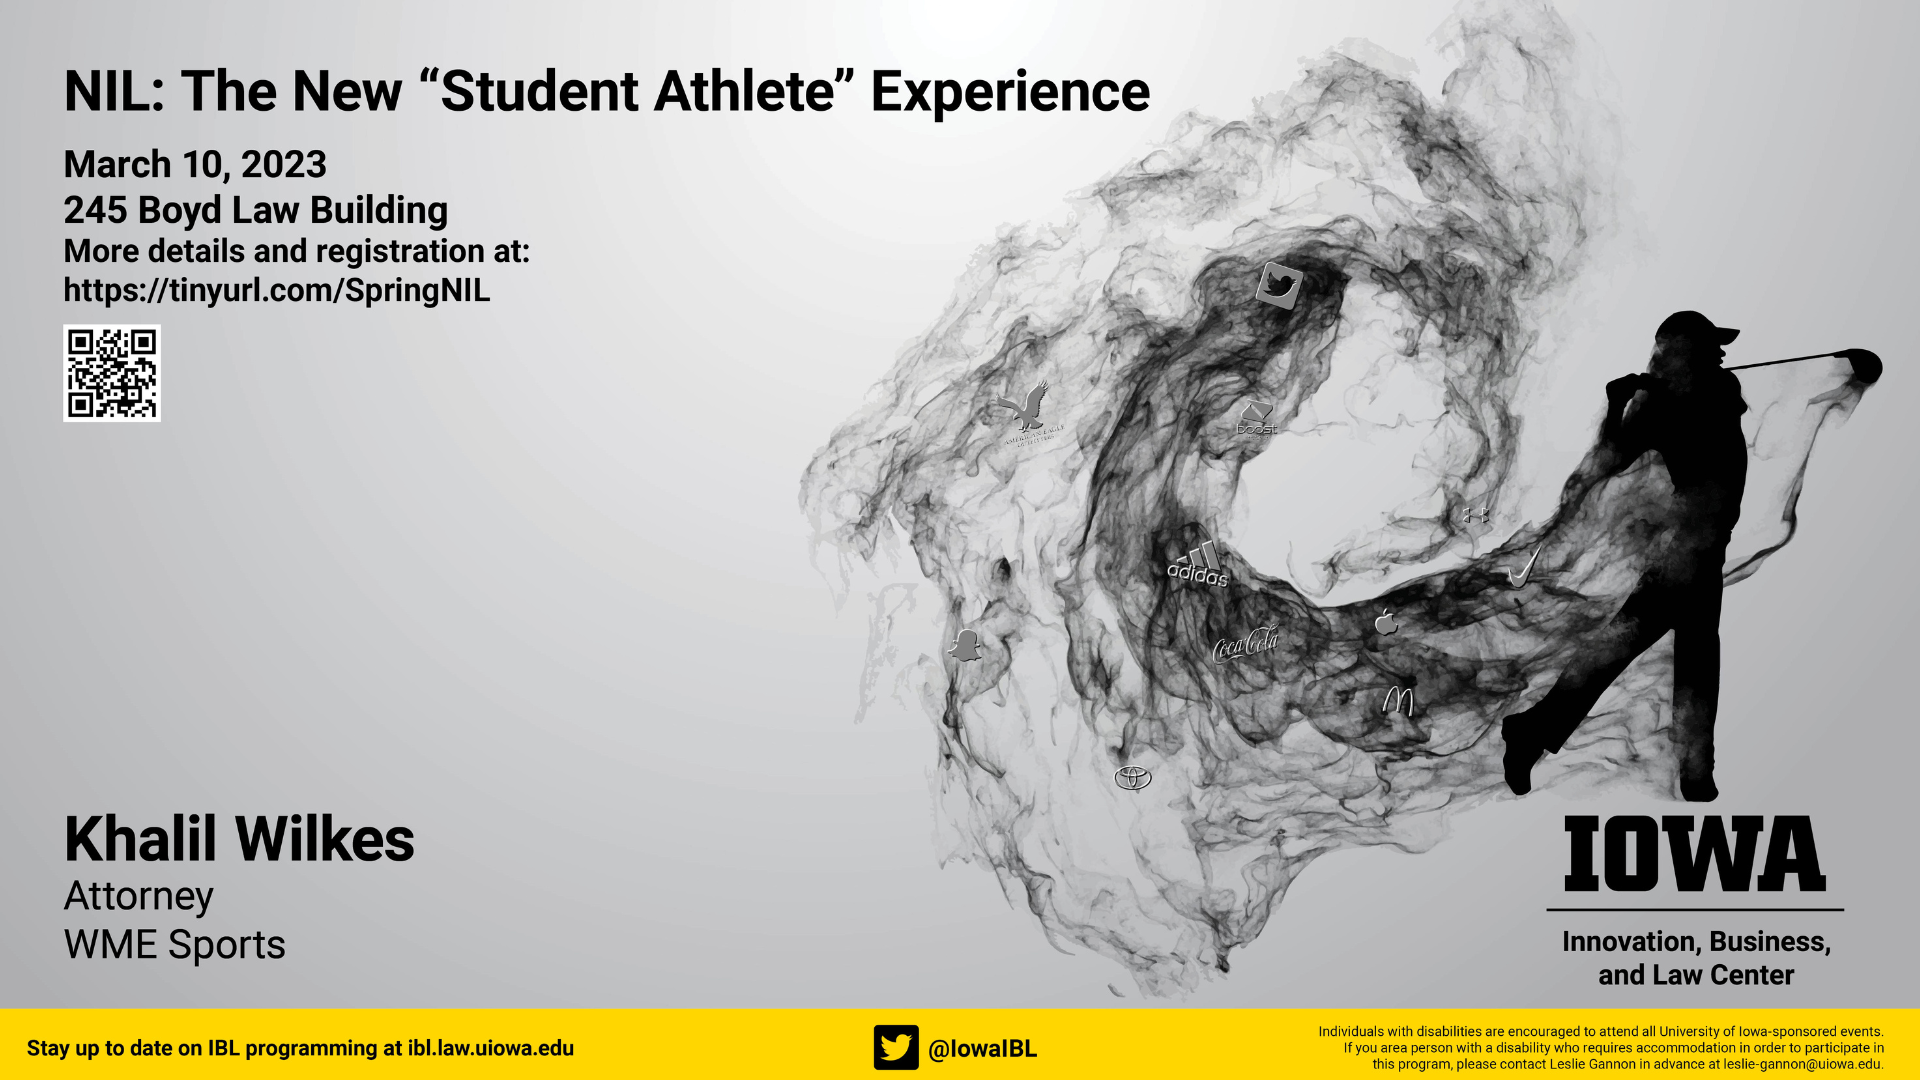 NIL: The New "Student Athlete" Experience March 10, 2023. 245 BLB. More details and registration at: https://tinyurl.com/SpringNIL. Khalil Wilkes Attorney WME Sports. 